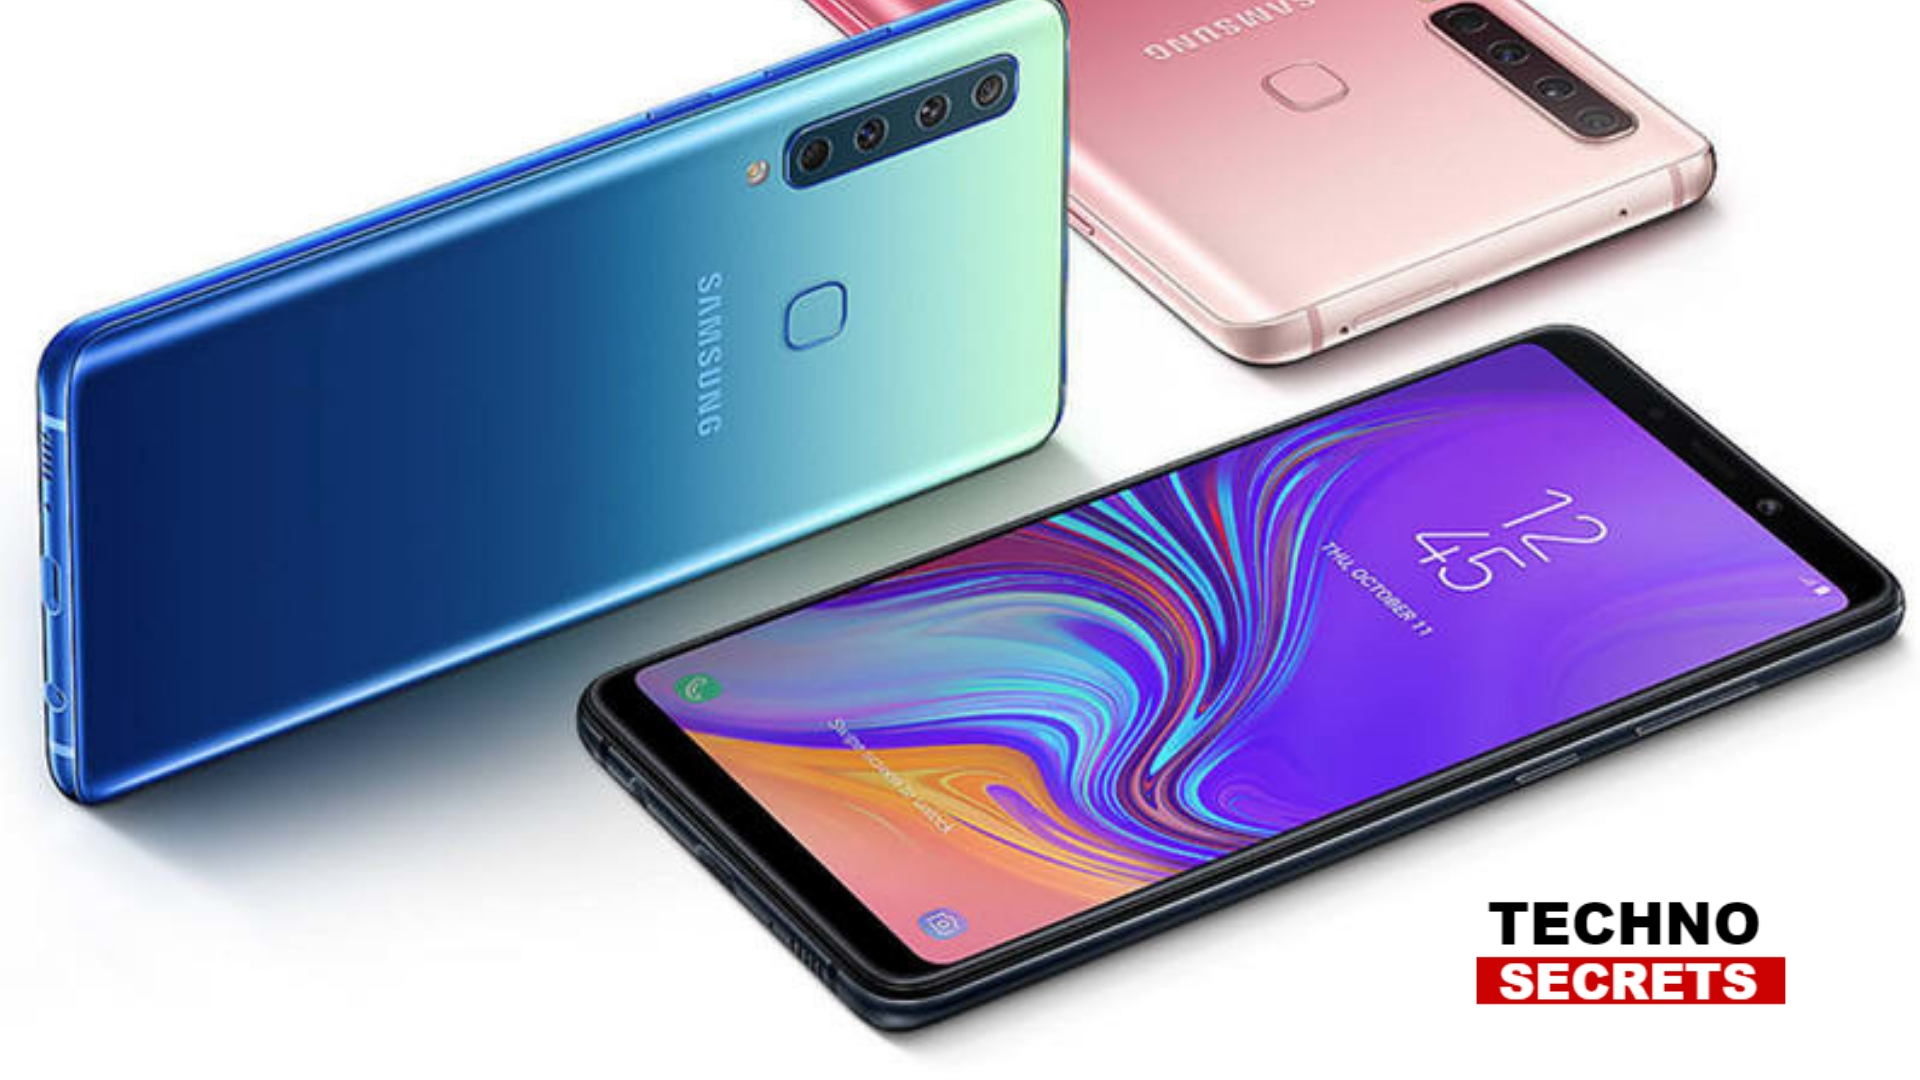 Samsung Galaxy A9 To Launch In India Today, Know The Price, Features And How To Watch Livestream